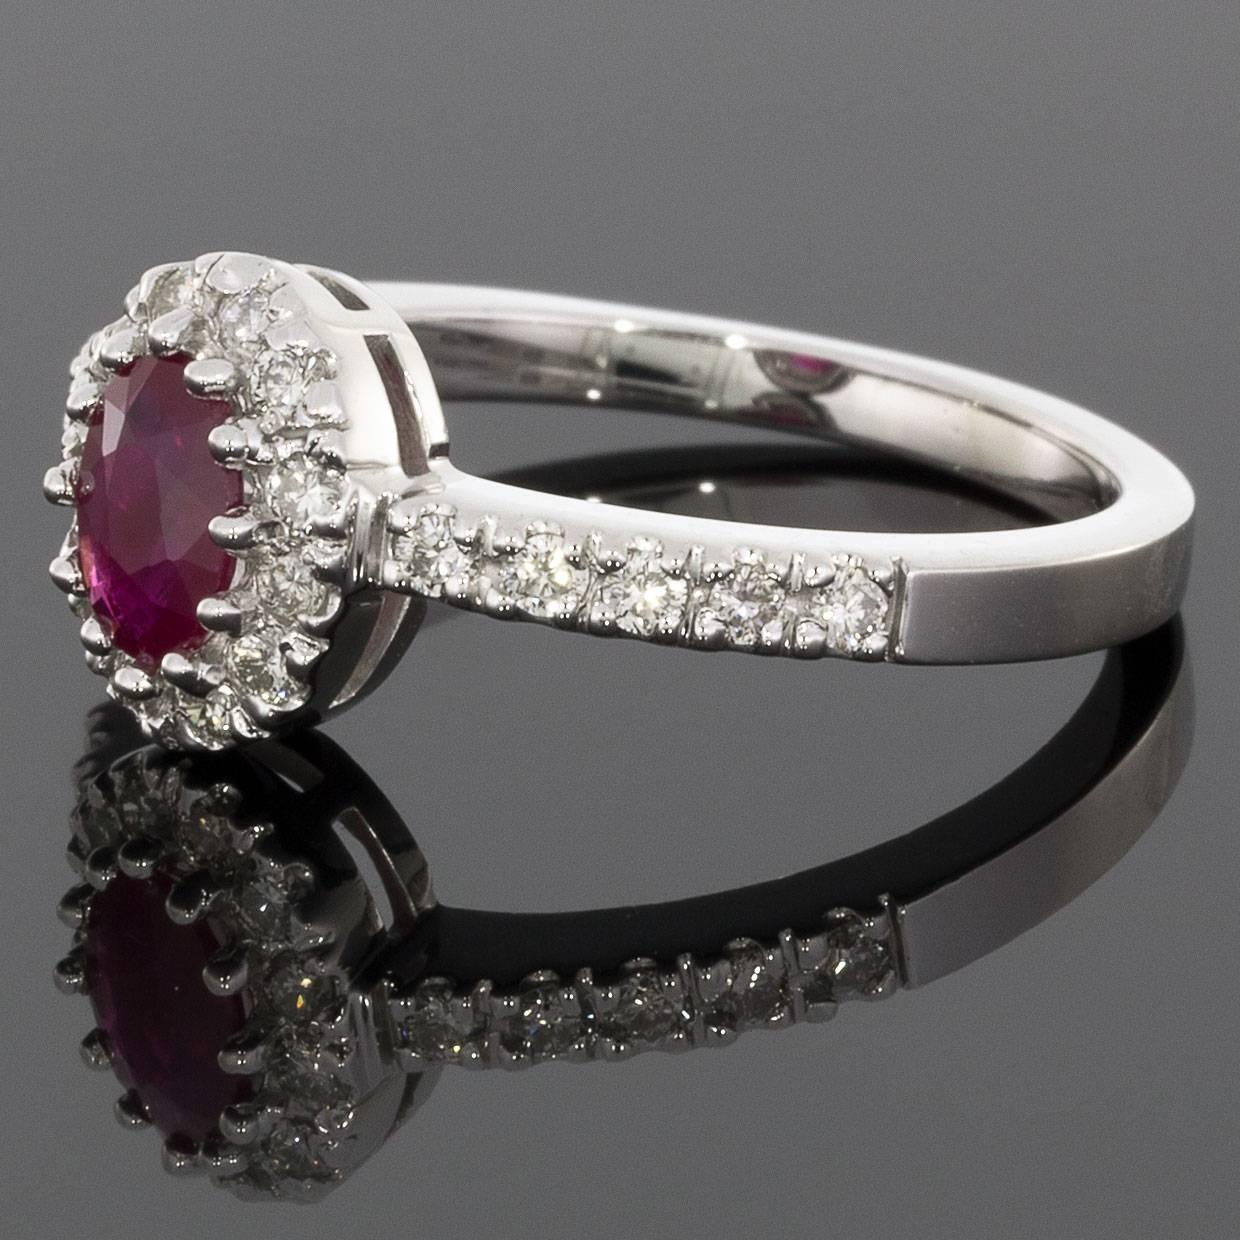 This lovely ruby ring has a timeless diamond halo design that gives a really sparkly look! The ring features an oval brilliant cut, natural, ruby center that is multi, shared prong set in white gold. This beautiful ruby is surrounded by a dazzling